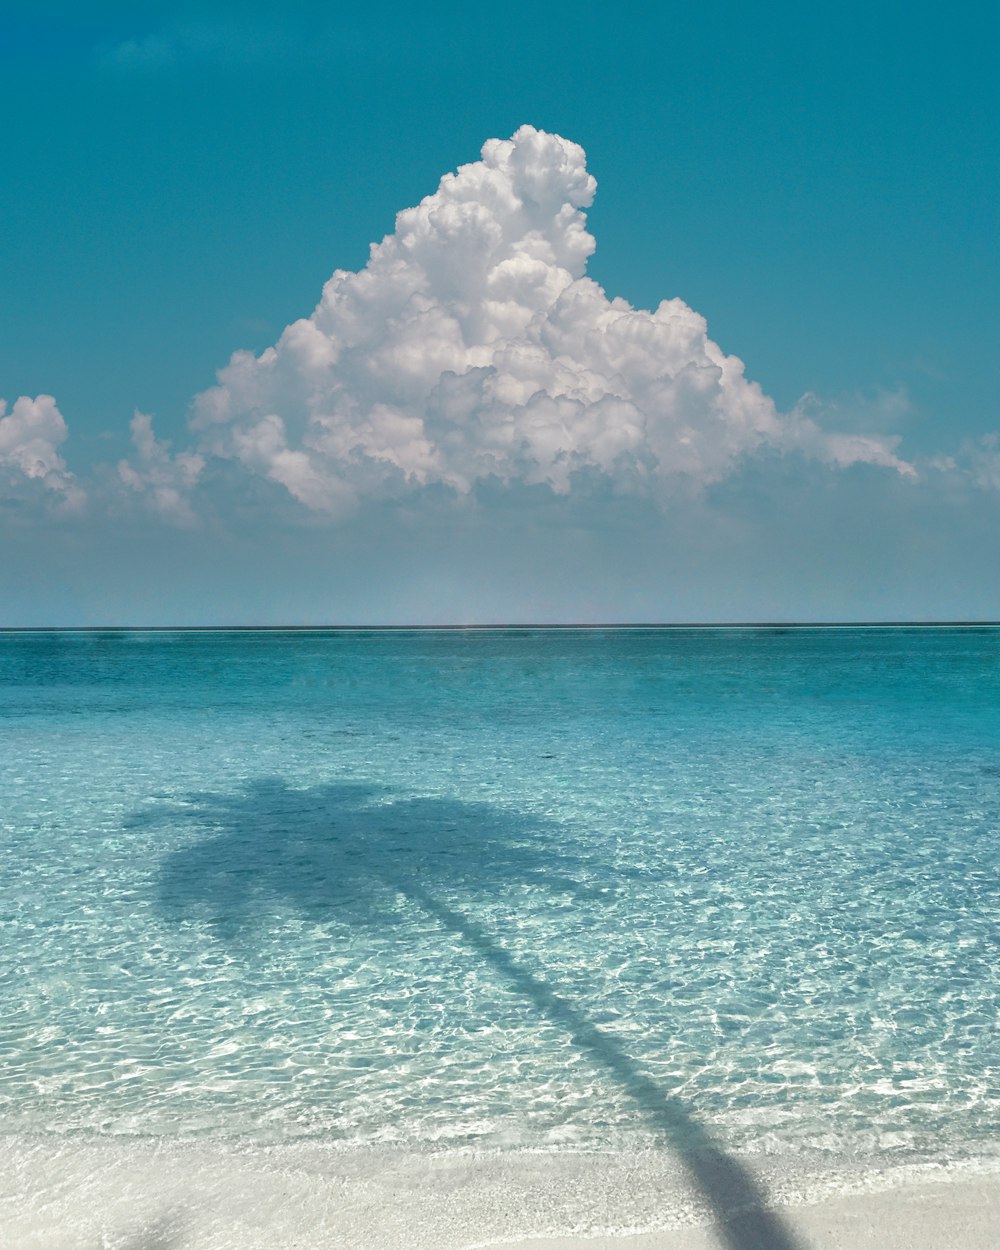 a shadow of a boat in the water